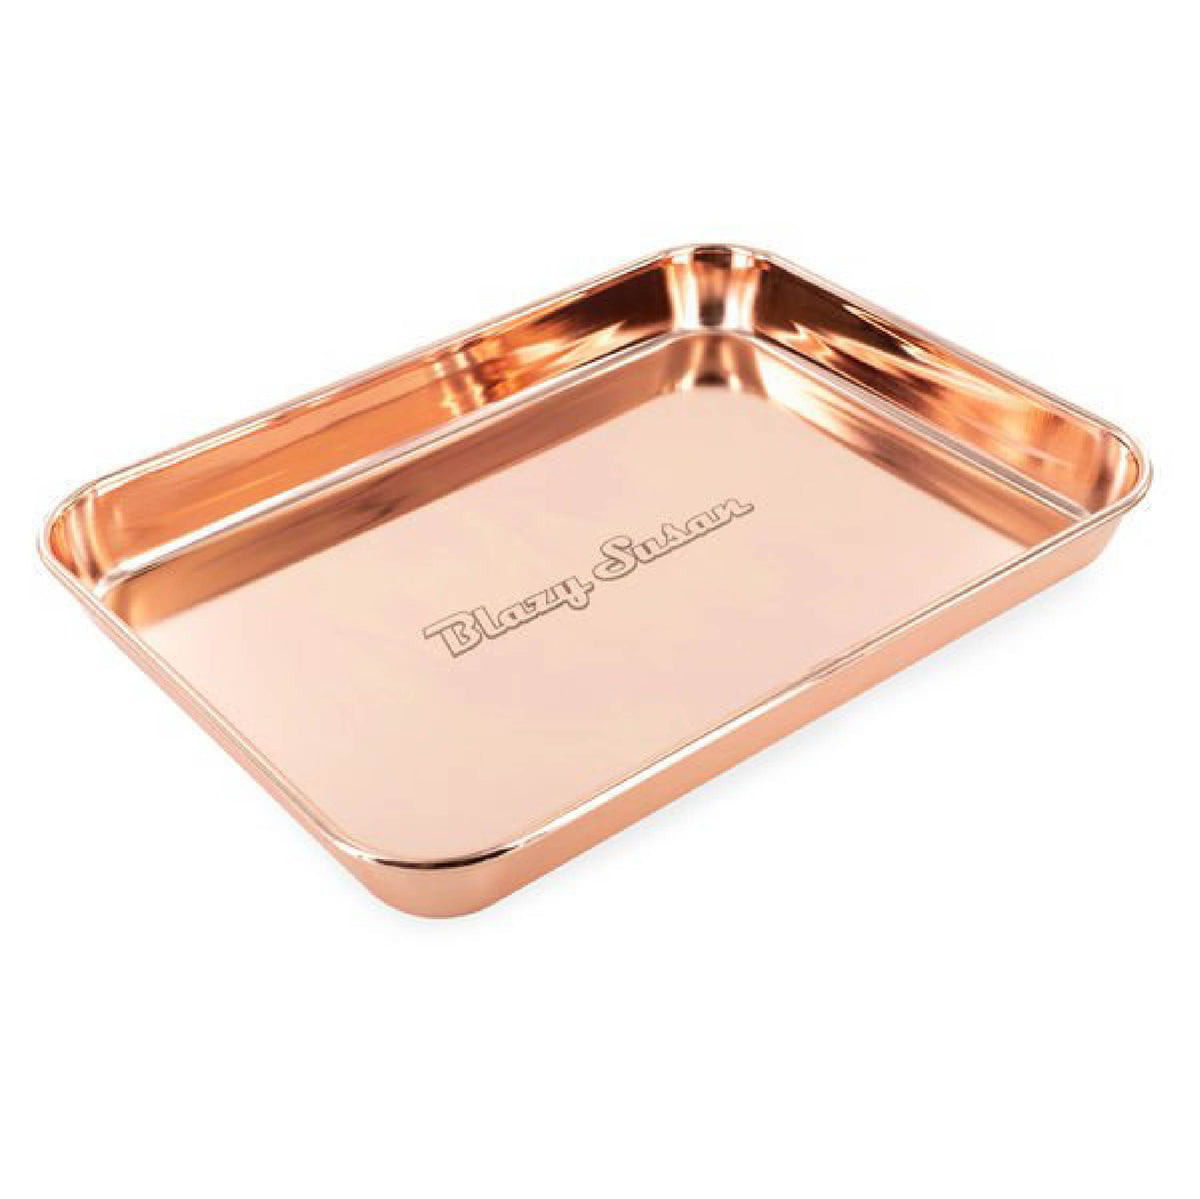 Stainless Steel Rolling Tray Blazy Susan